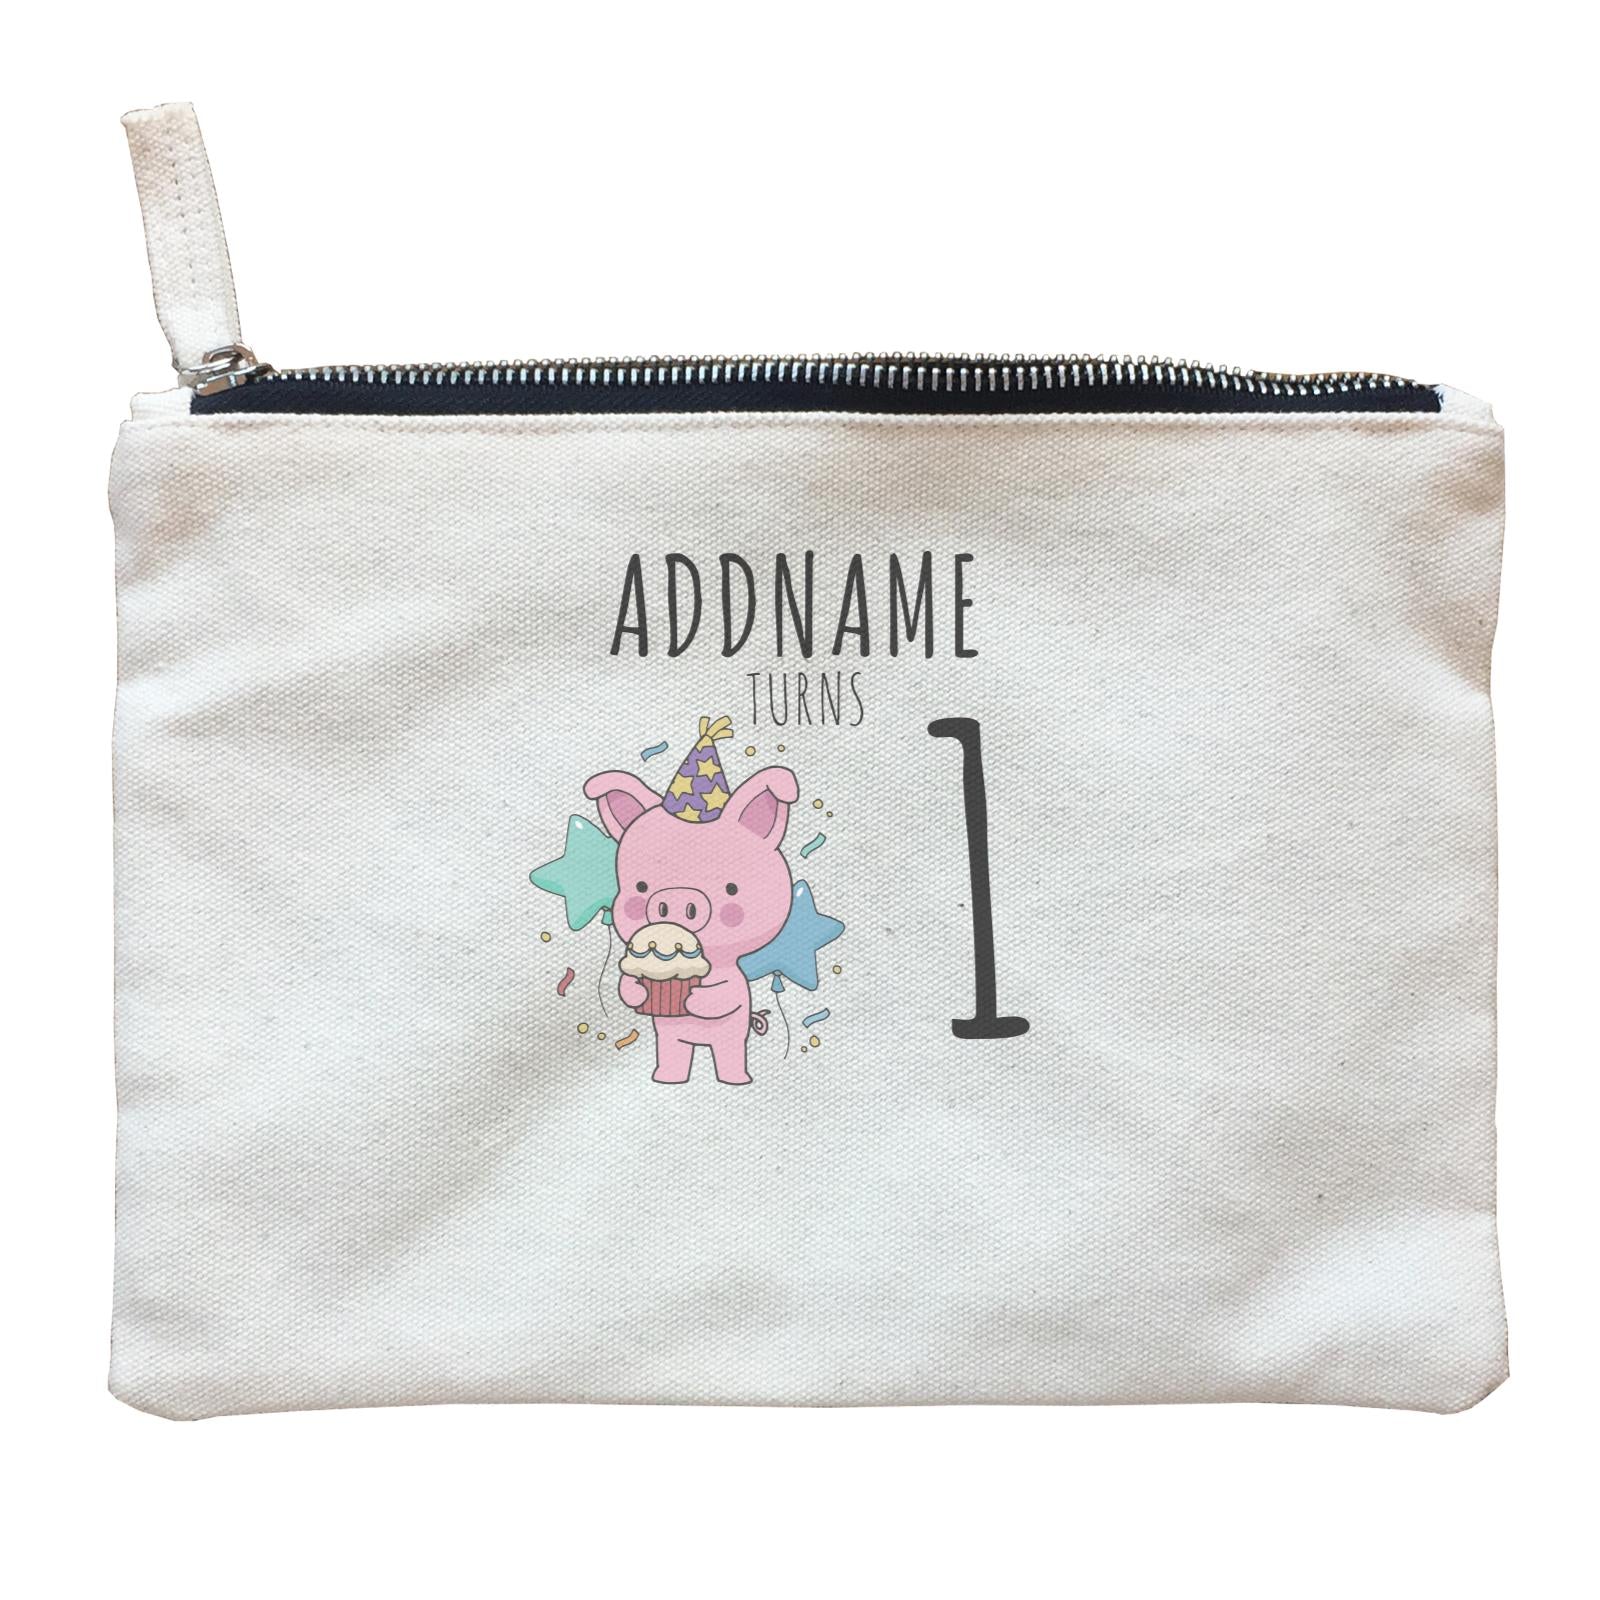 Birthday Sketch Animals Pig with Party Hat Eating Cupcake Addname Turns 1 Zipper Pouch